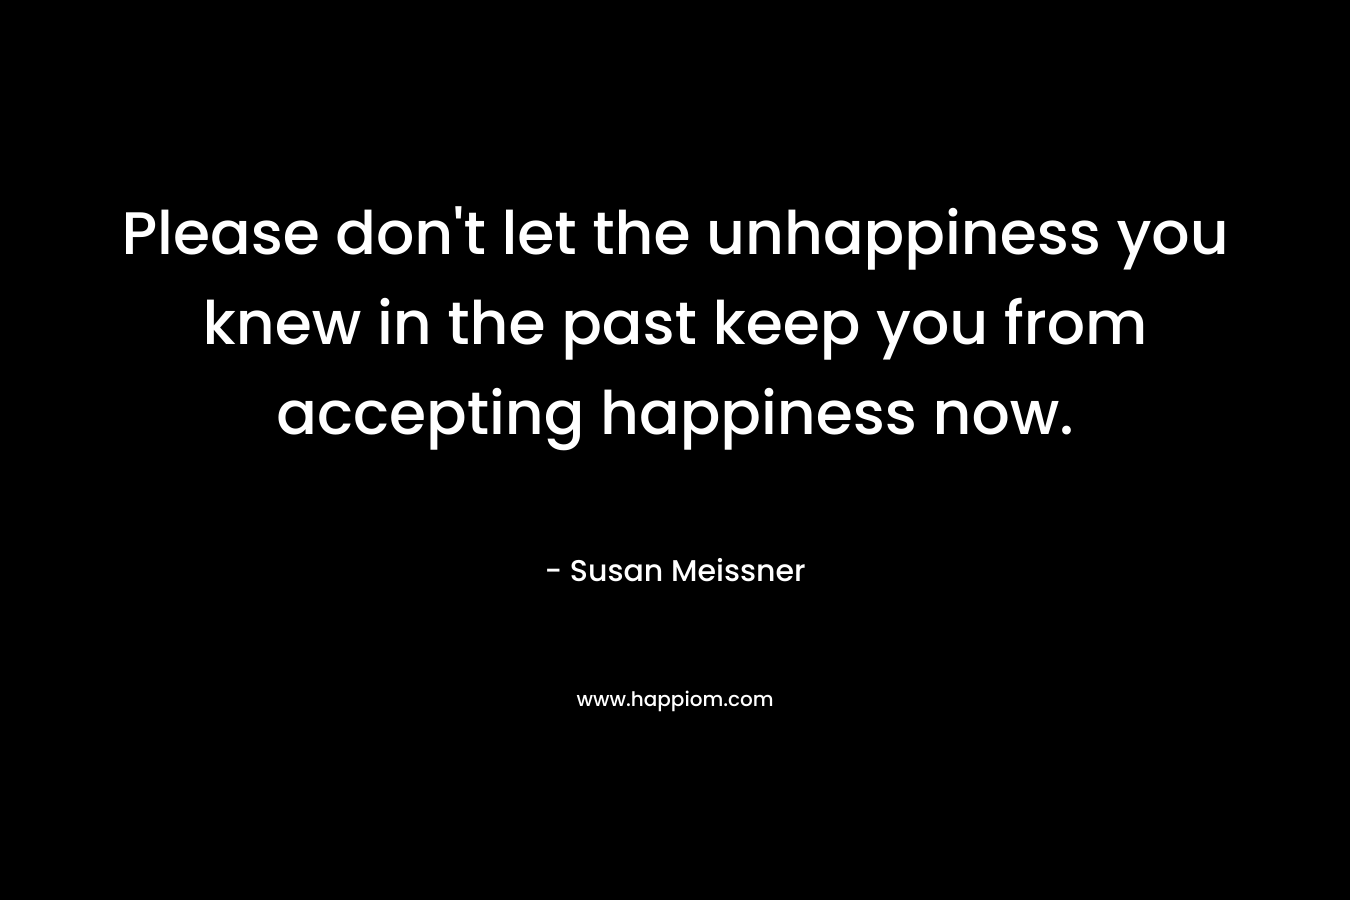 Please don't let the unhappiness you knew in the past keep you from accepting happiness now.